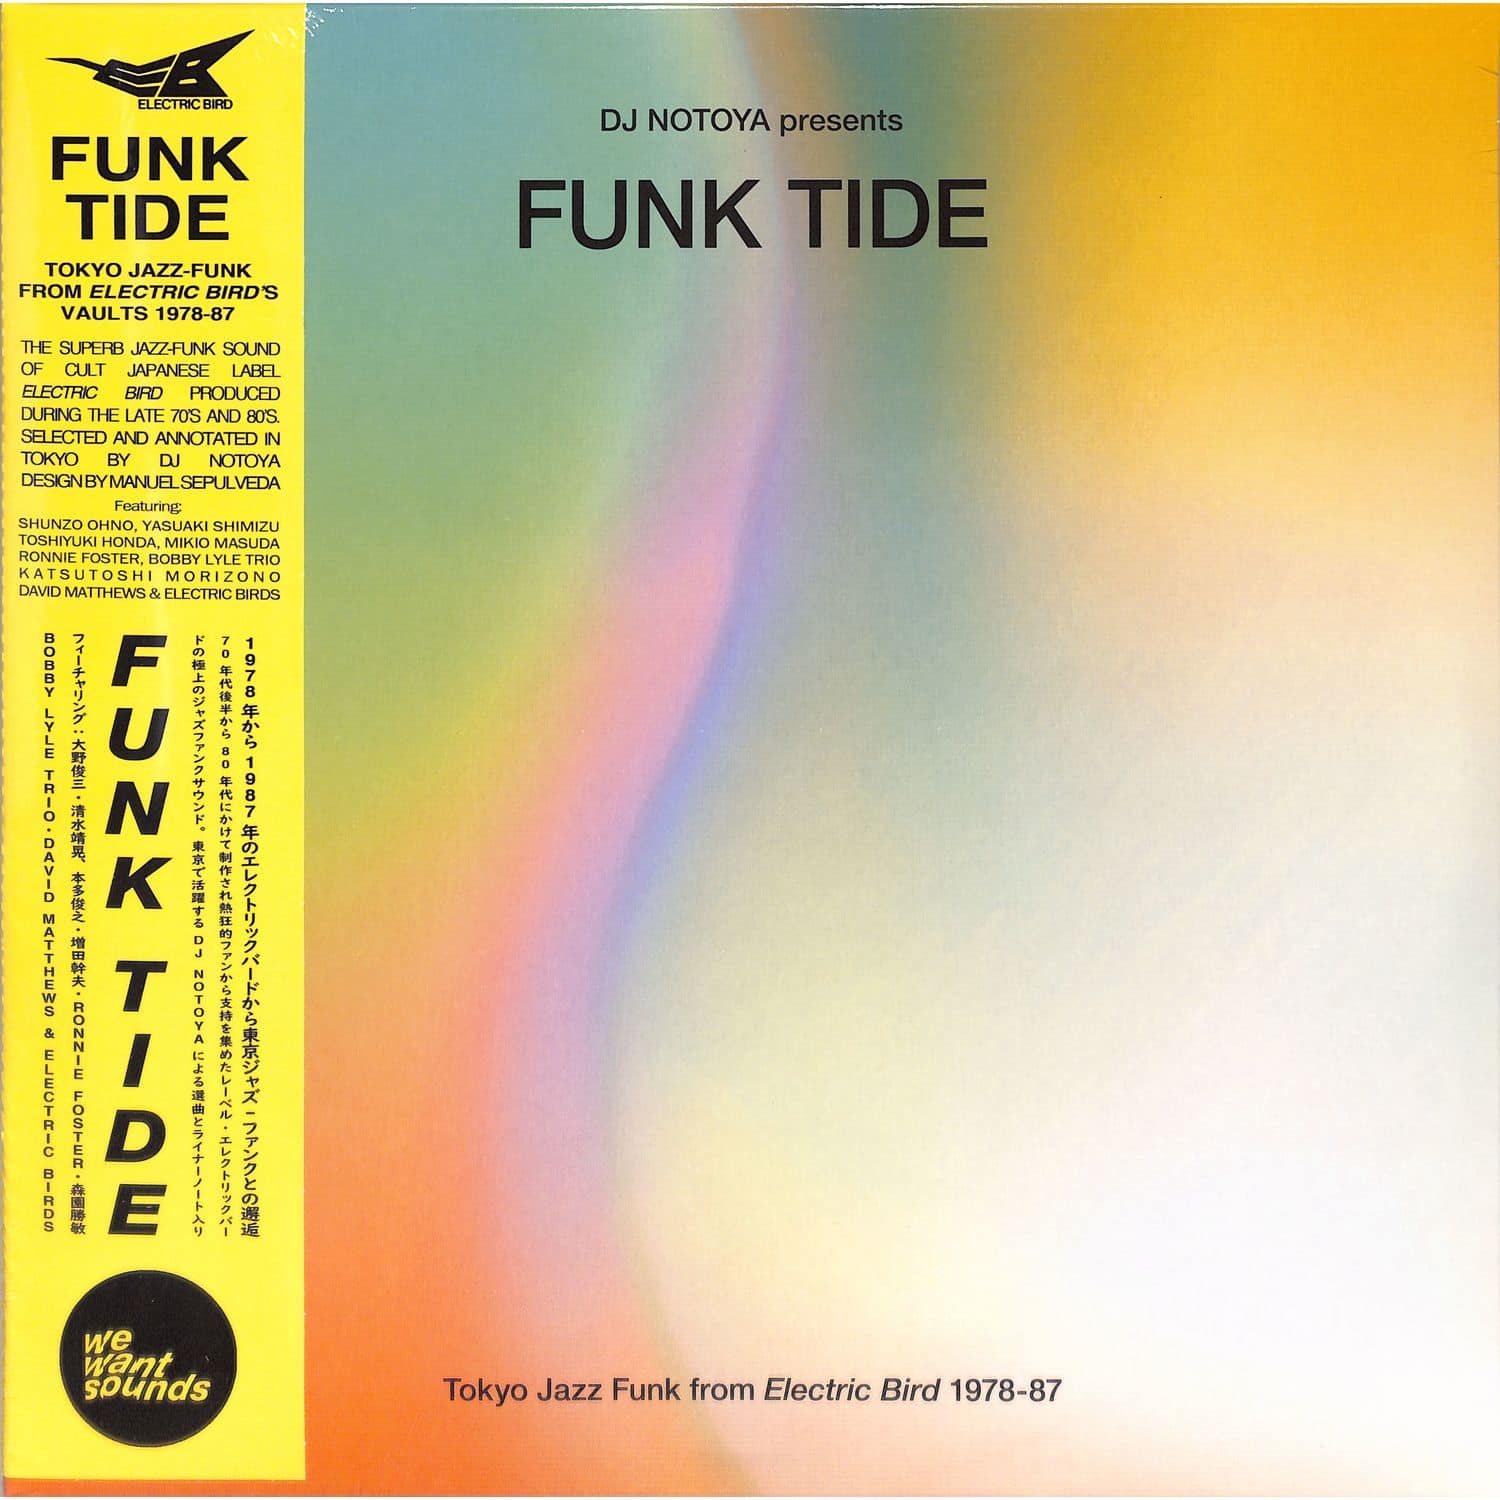 Various Artists - FUNK TIDE TOKYO JAZZ-FUNK FROM ELECTRIC BIRD 1978-87 